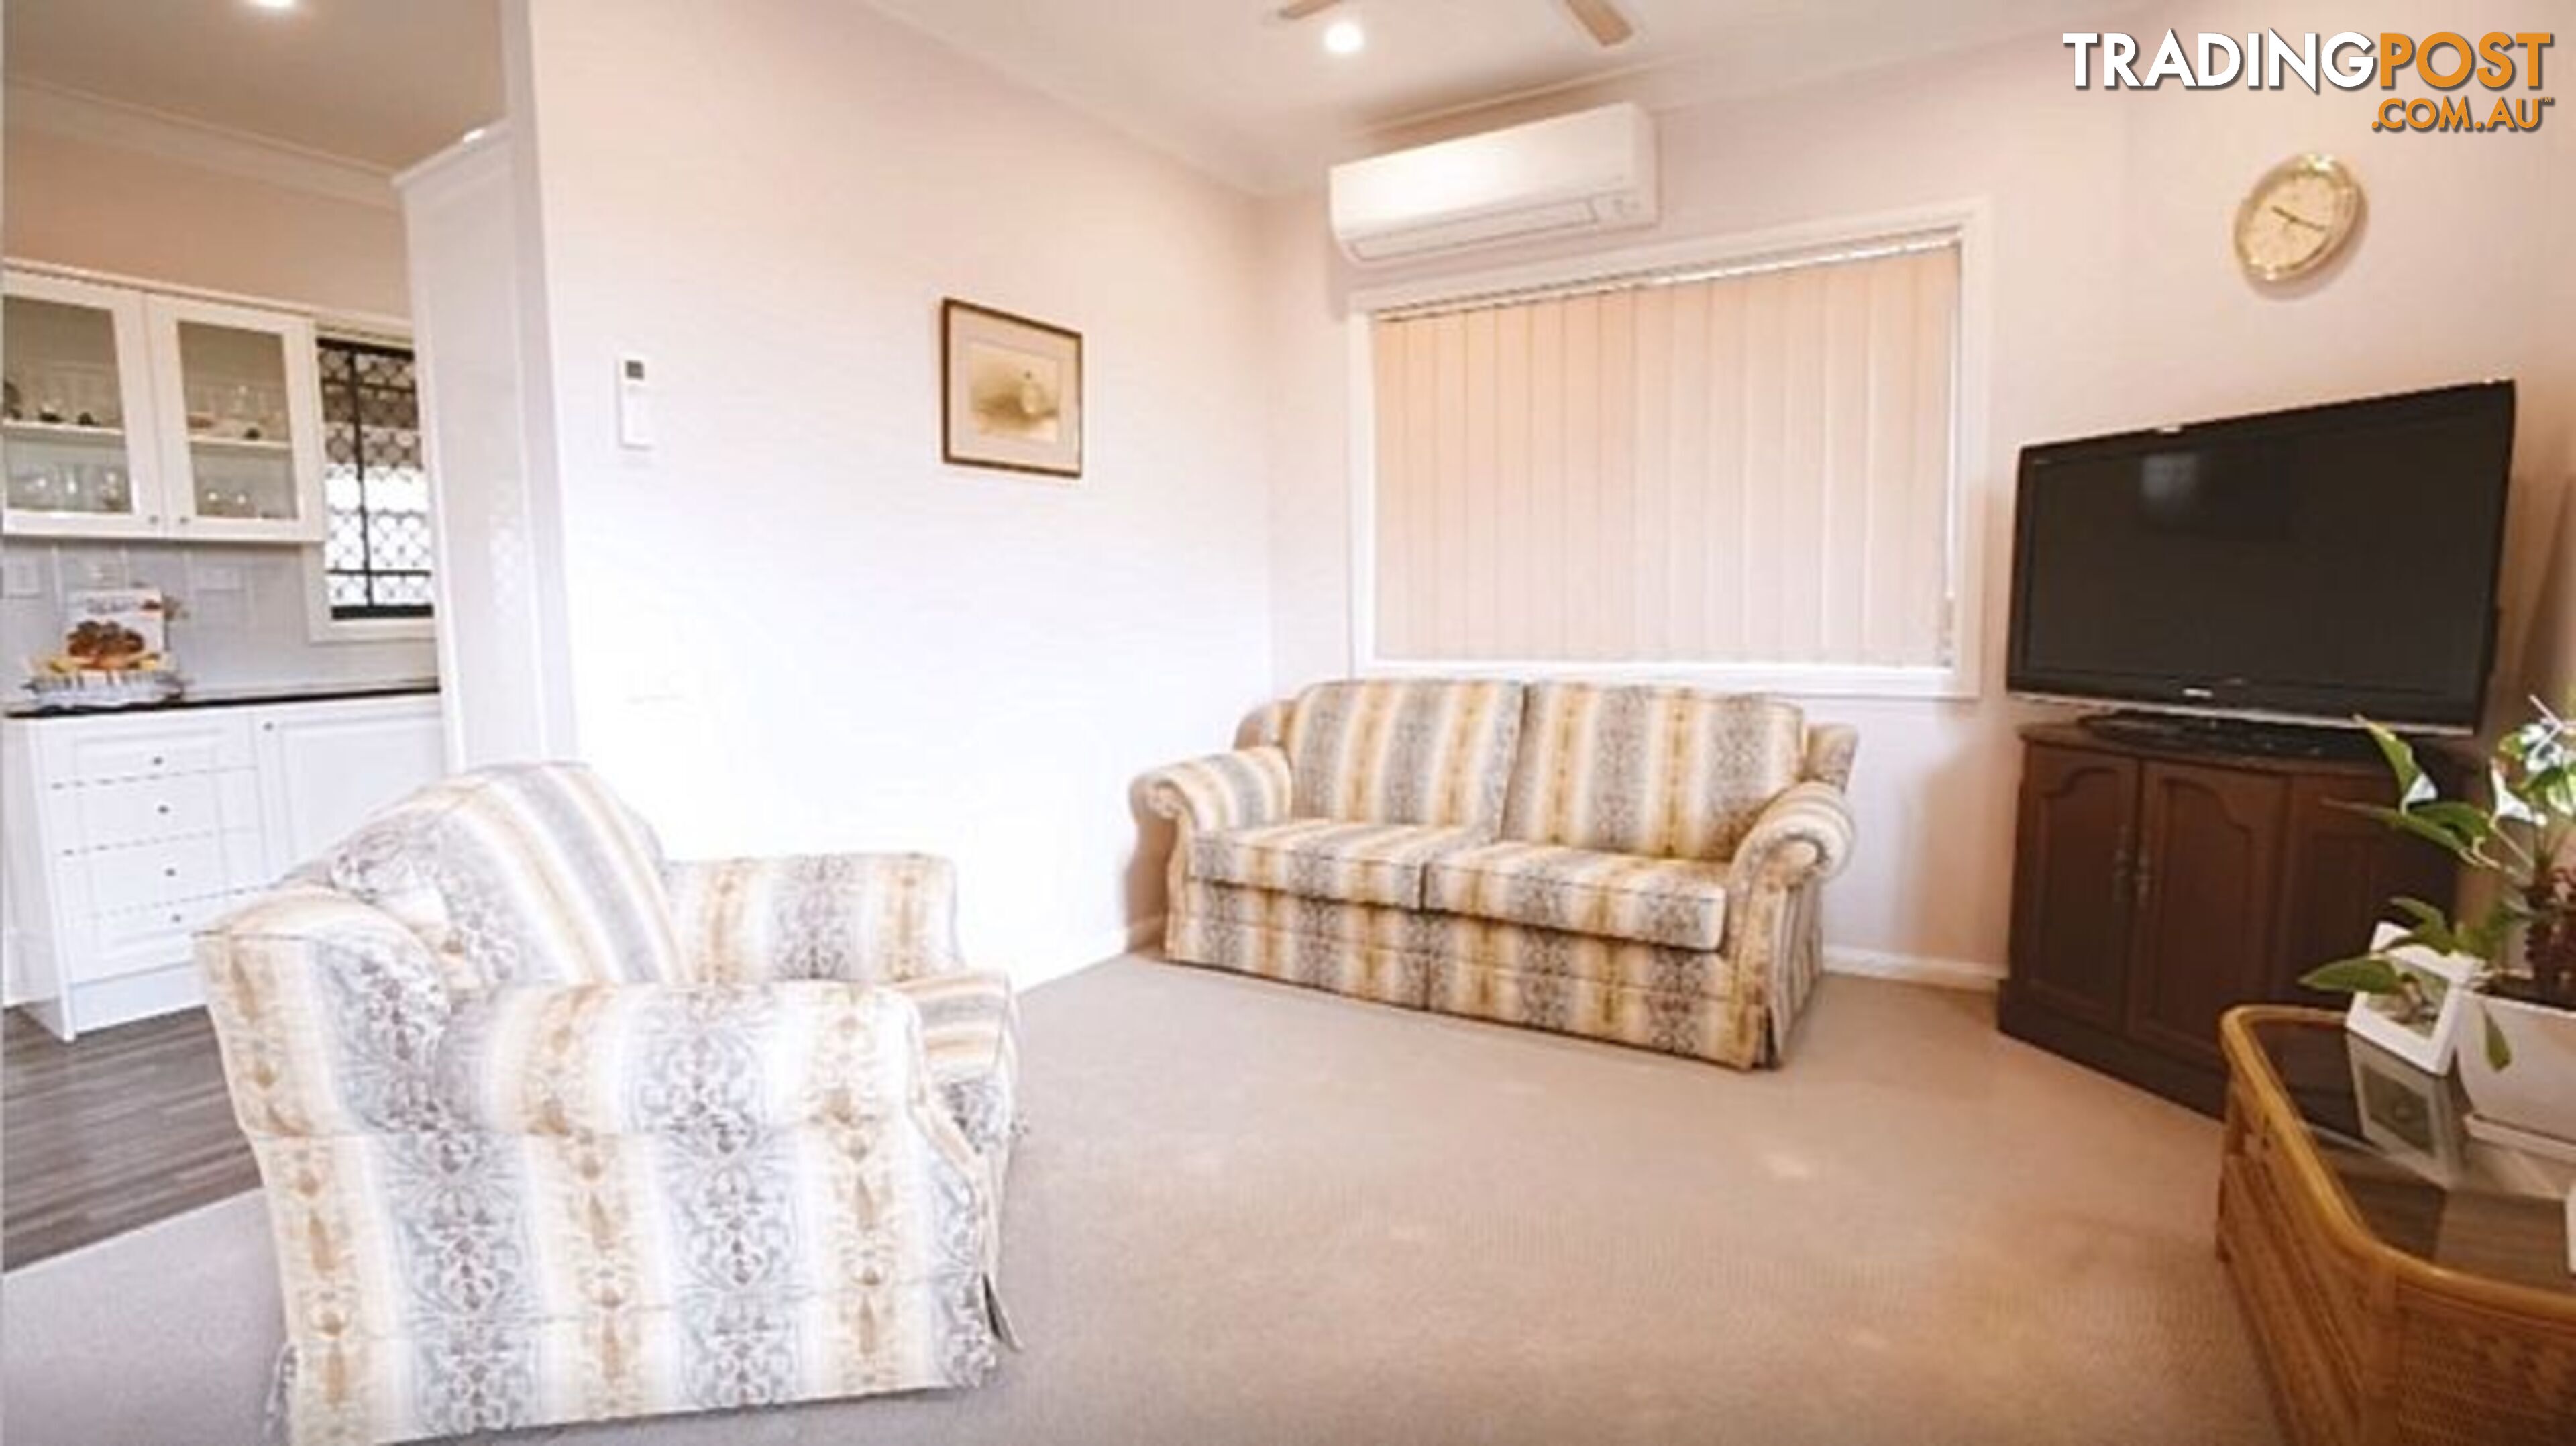 3 Olive Street CONDELL PARK NSW 2200